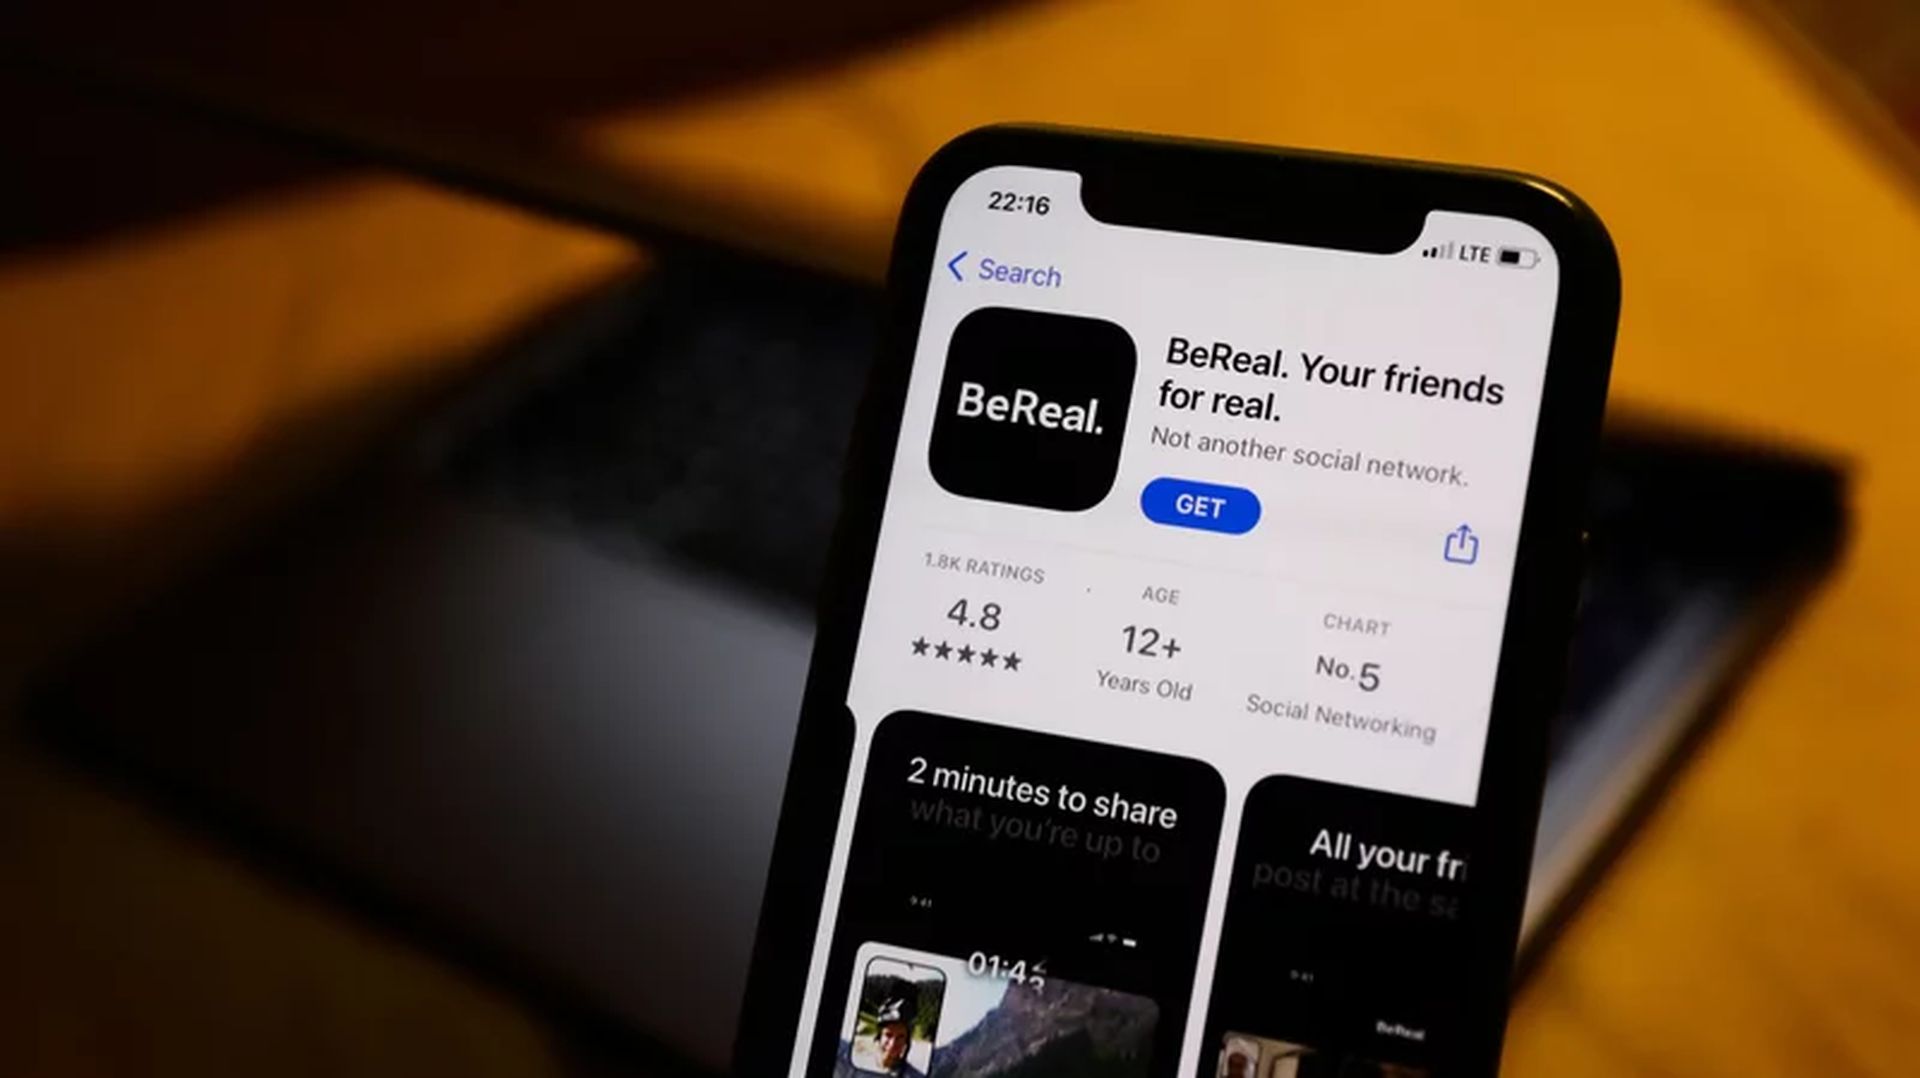 Today, we will be covering where are friend requests on BeReal and how you can add someone as your friend, so you can enjoy the app with your loved ones.